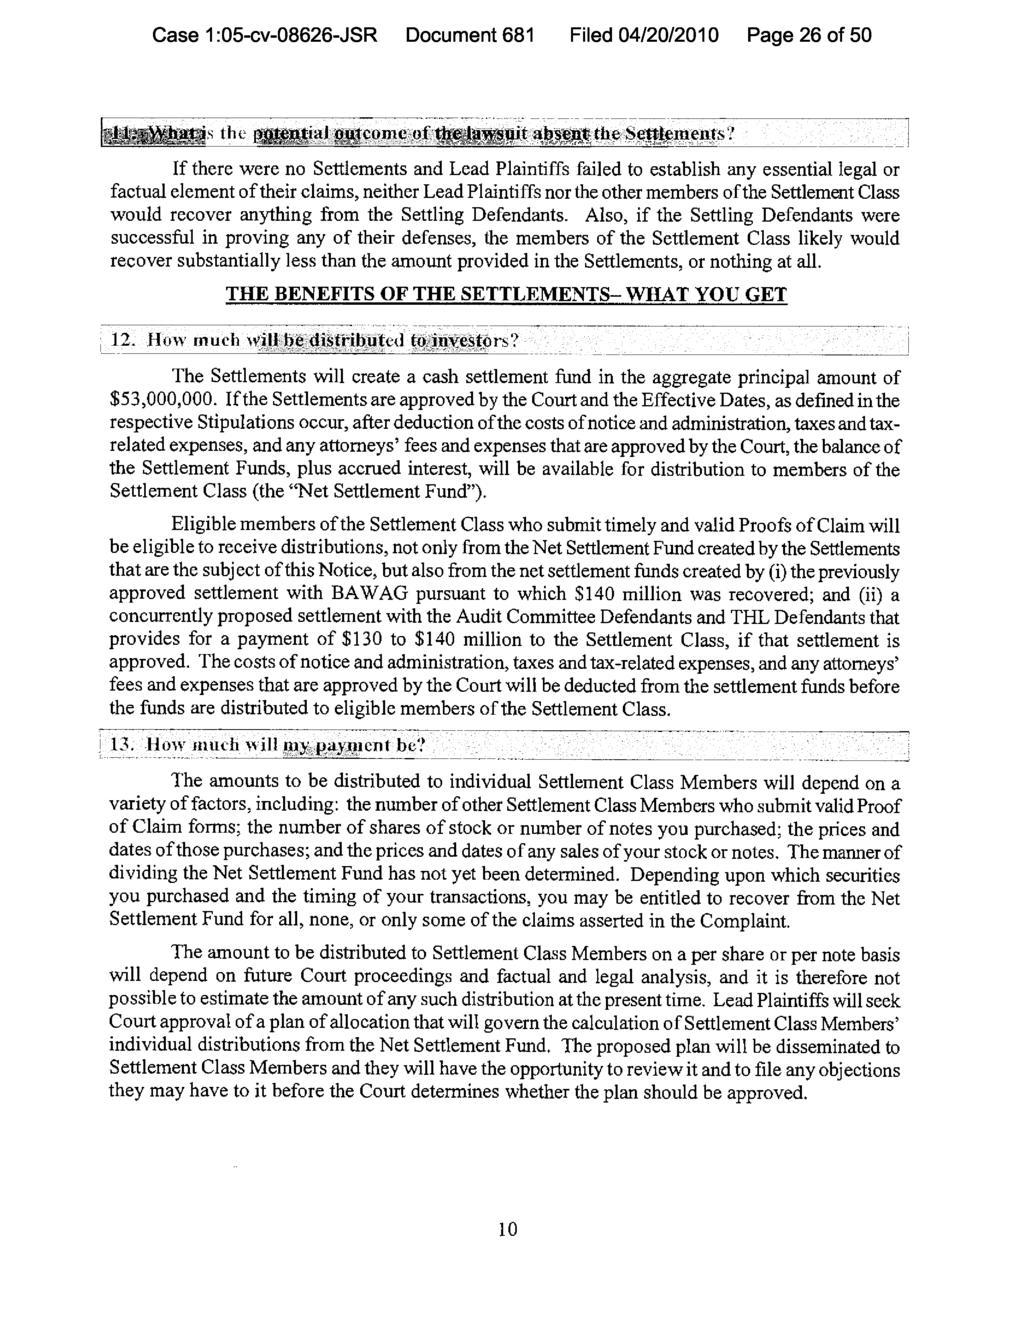 Case 1:05-cv-08626-JSR Document 681 Filed 04/20/2010 Page 26 of 50 If there were no Settlements and Lead Plaintiffs failed to establish any essential legal or factual element of their claims, neither